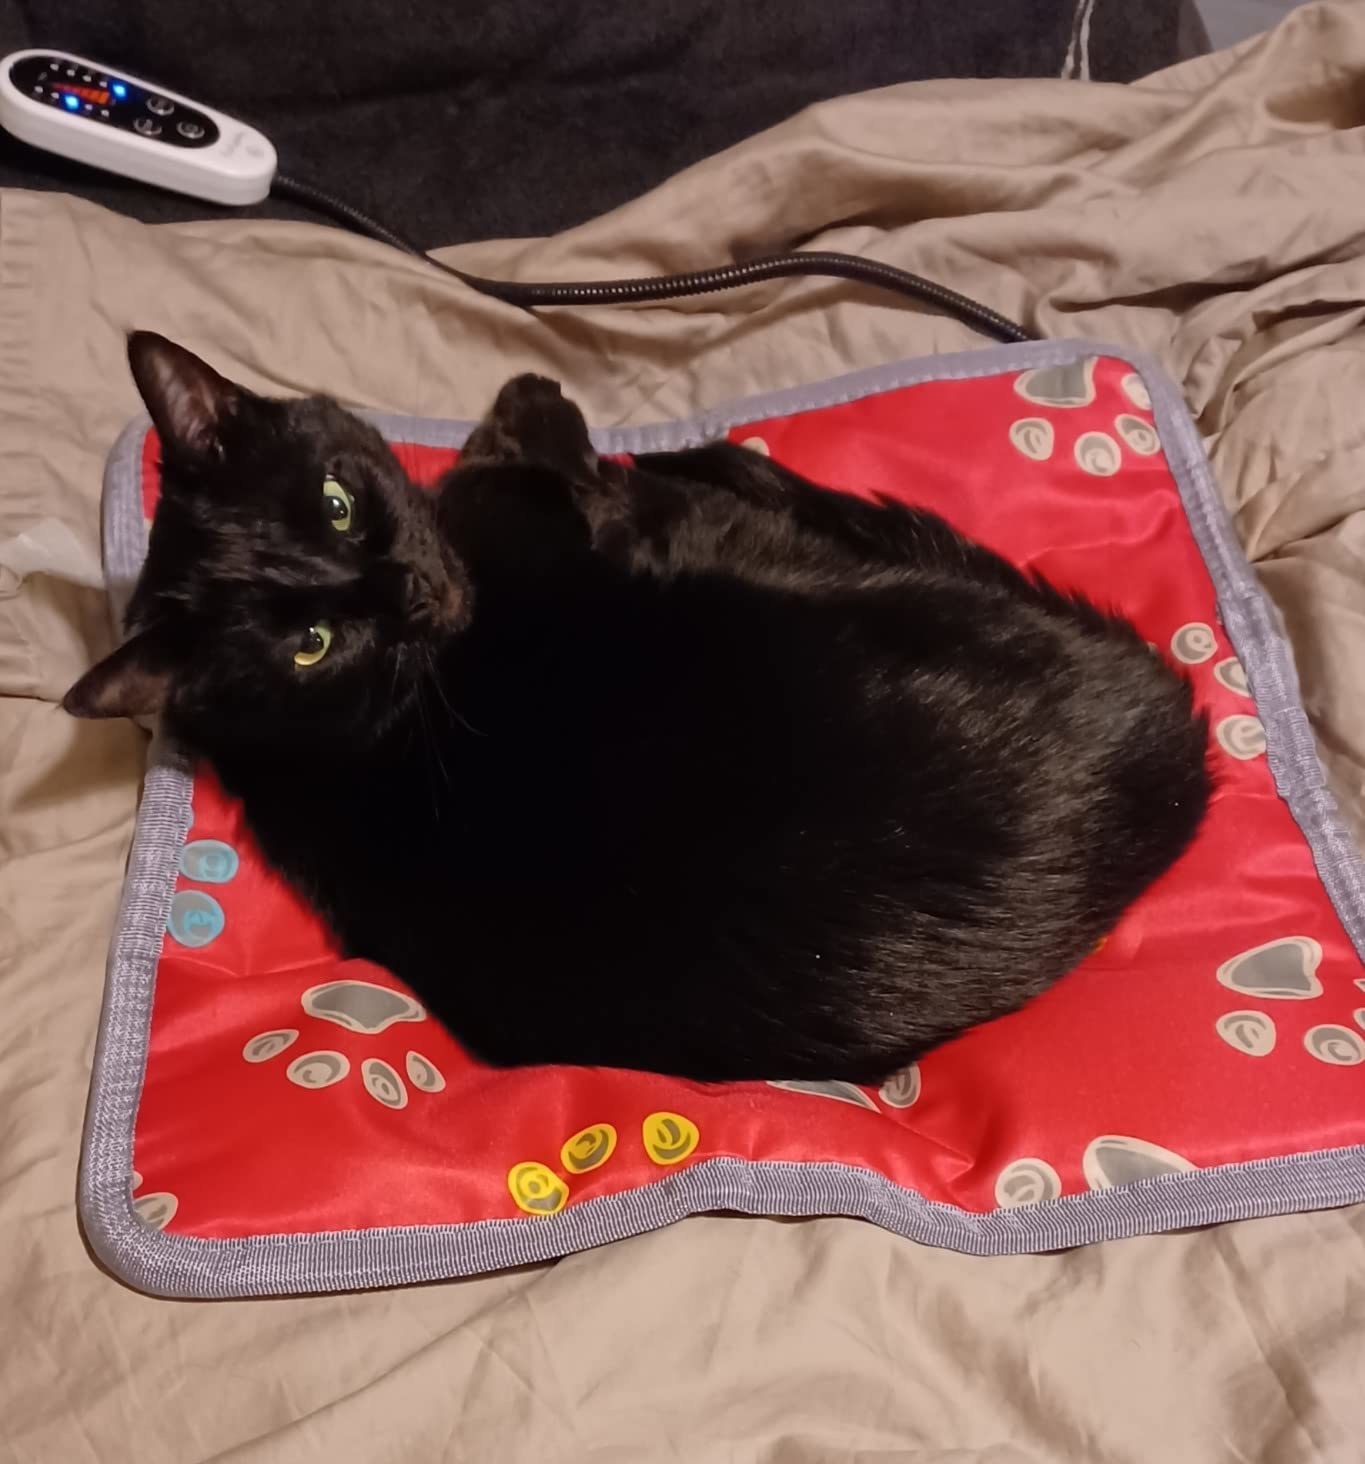 Review photo of cat enjoying the heating pad